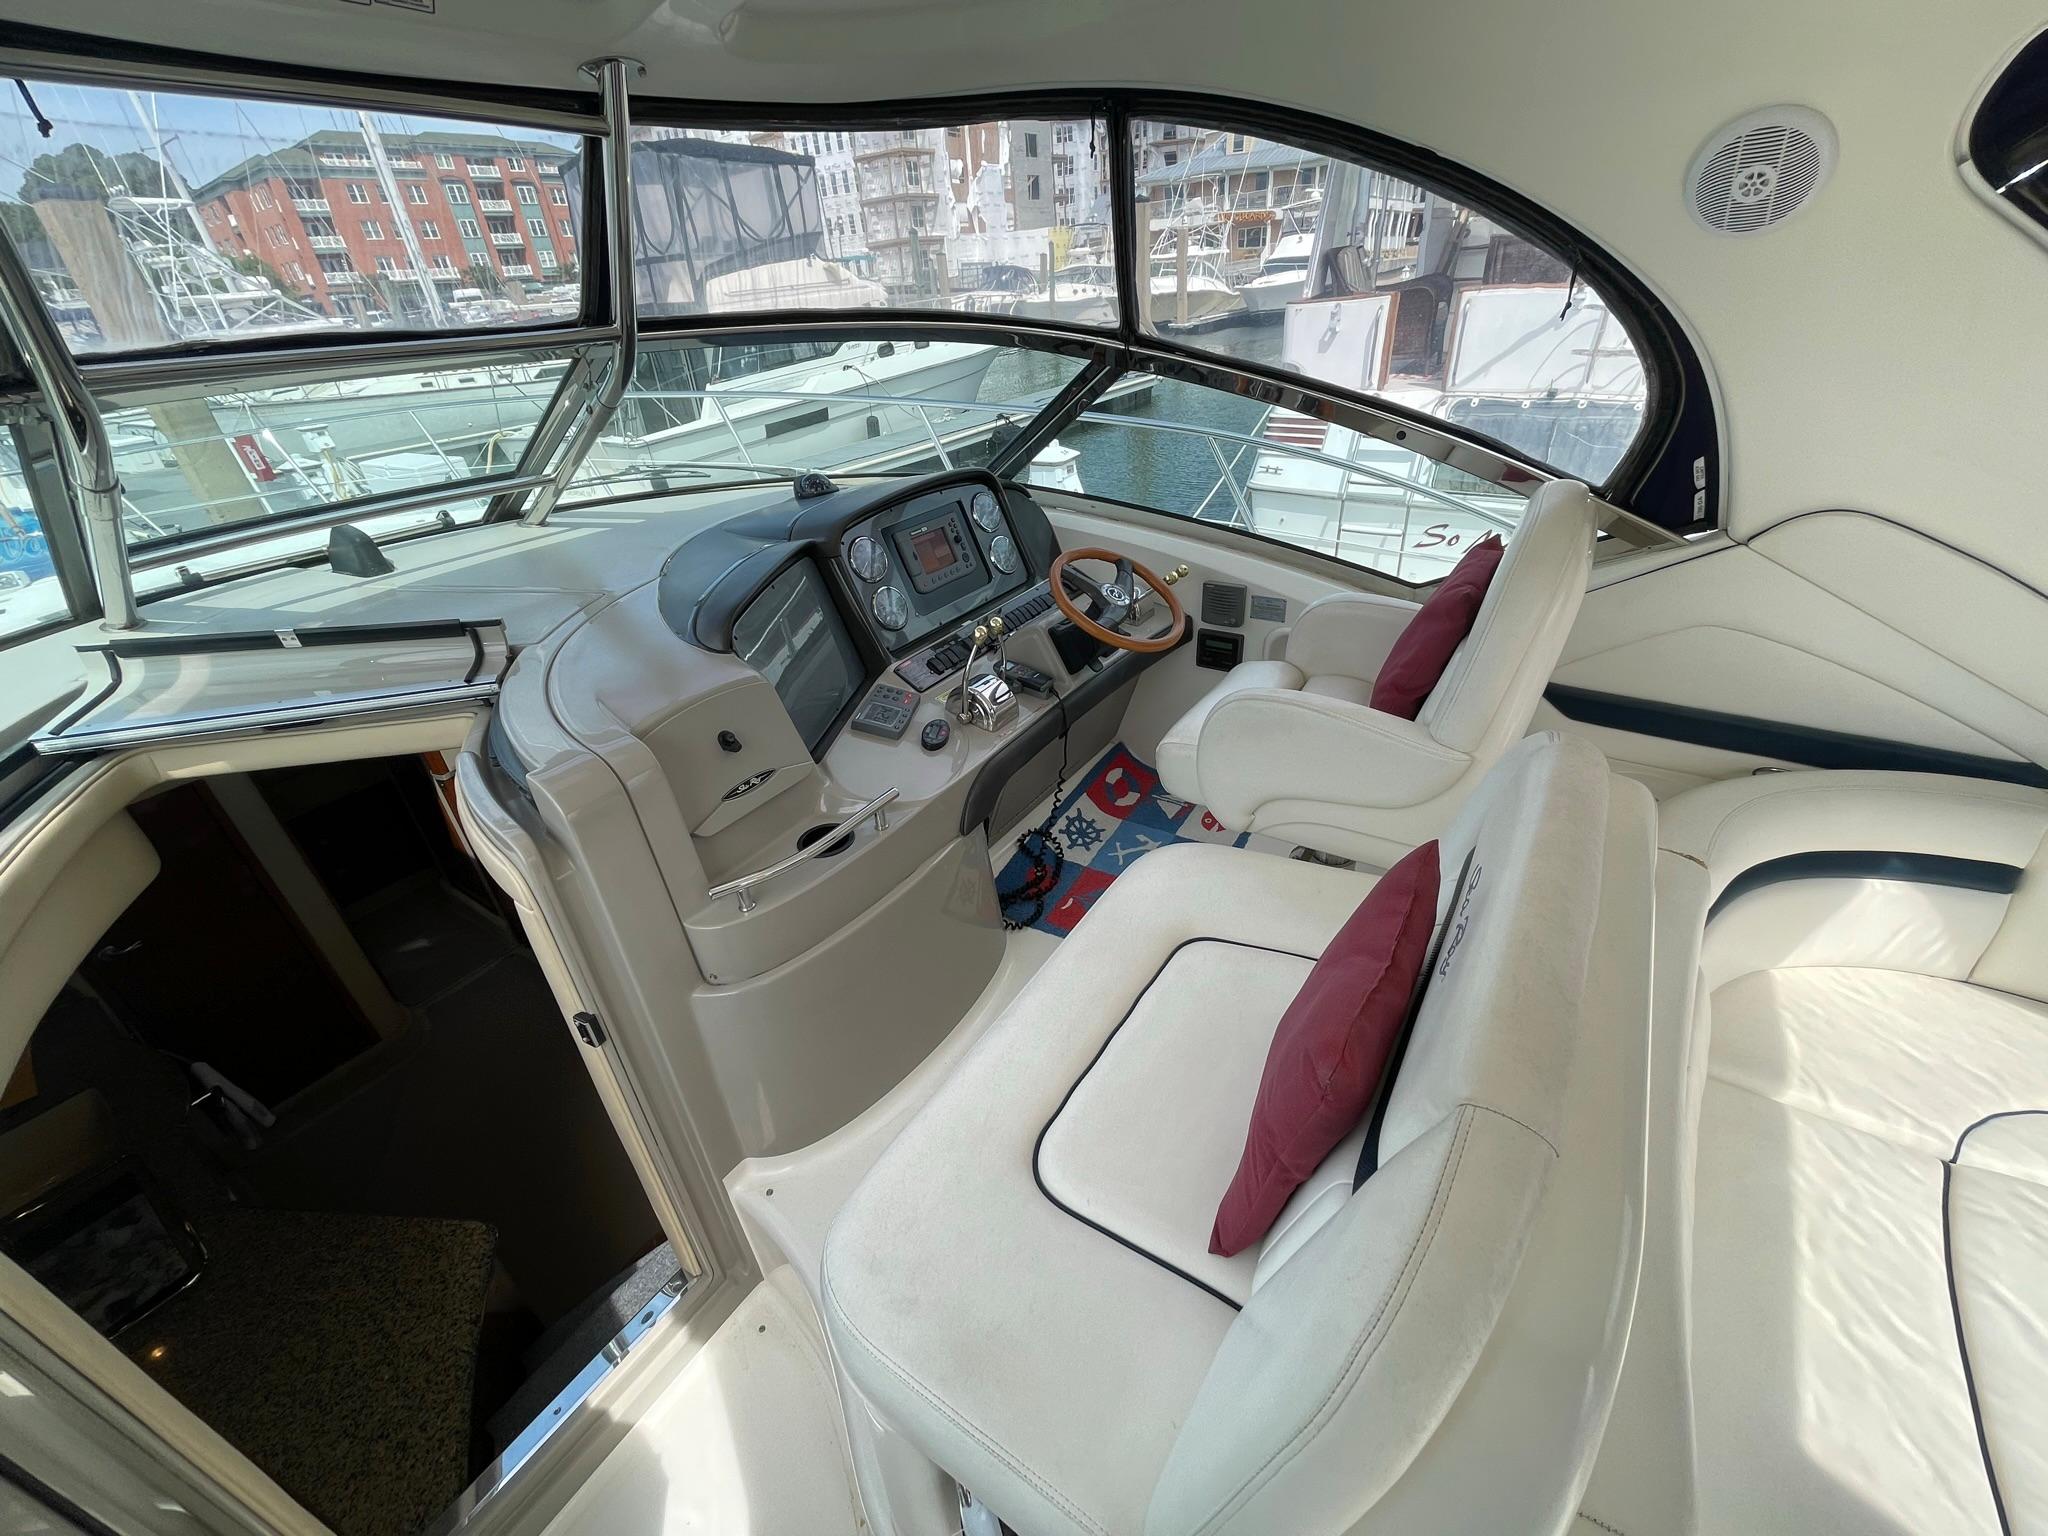 HELM DECK OVERVIEW W/ADJUSTABLE CAPTAINS CHAIR & DOUBLE BENCH COMPANION SEATING